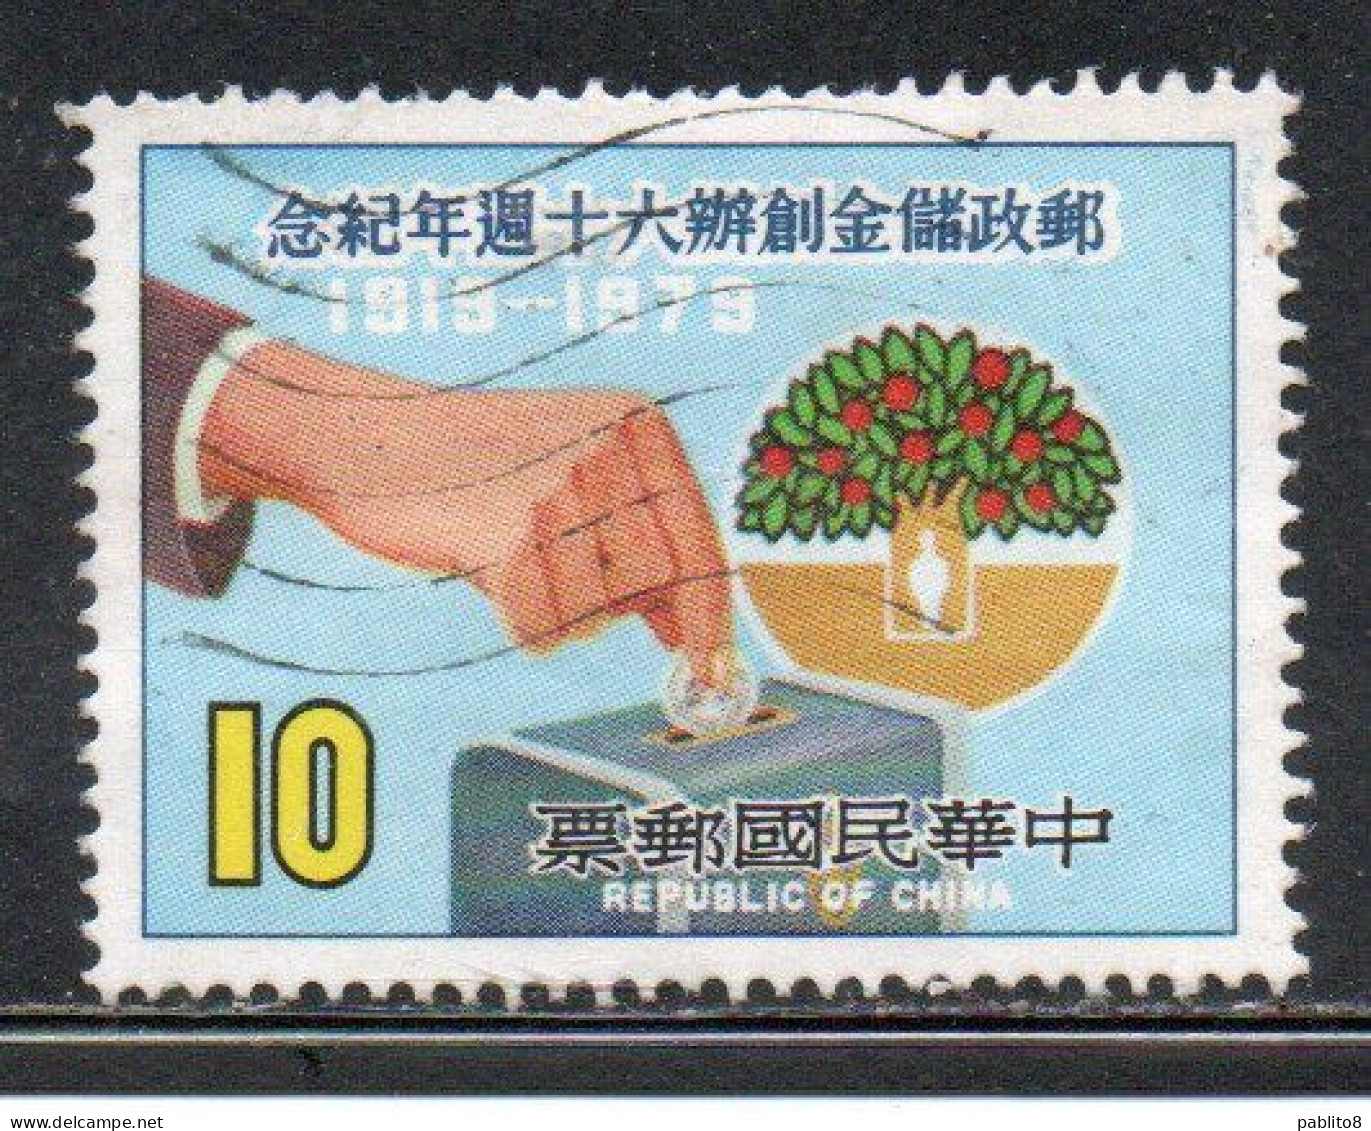 CHINA REPUBLIC CINA TAIWAN FORMOSA 1979 POSTAL SAVINGS HAND PUTTING COIN IN BANK 10$ USED USATO OBLITERE' - Usati